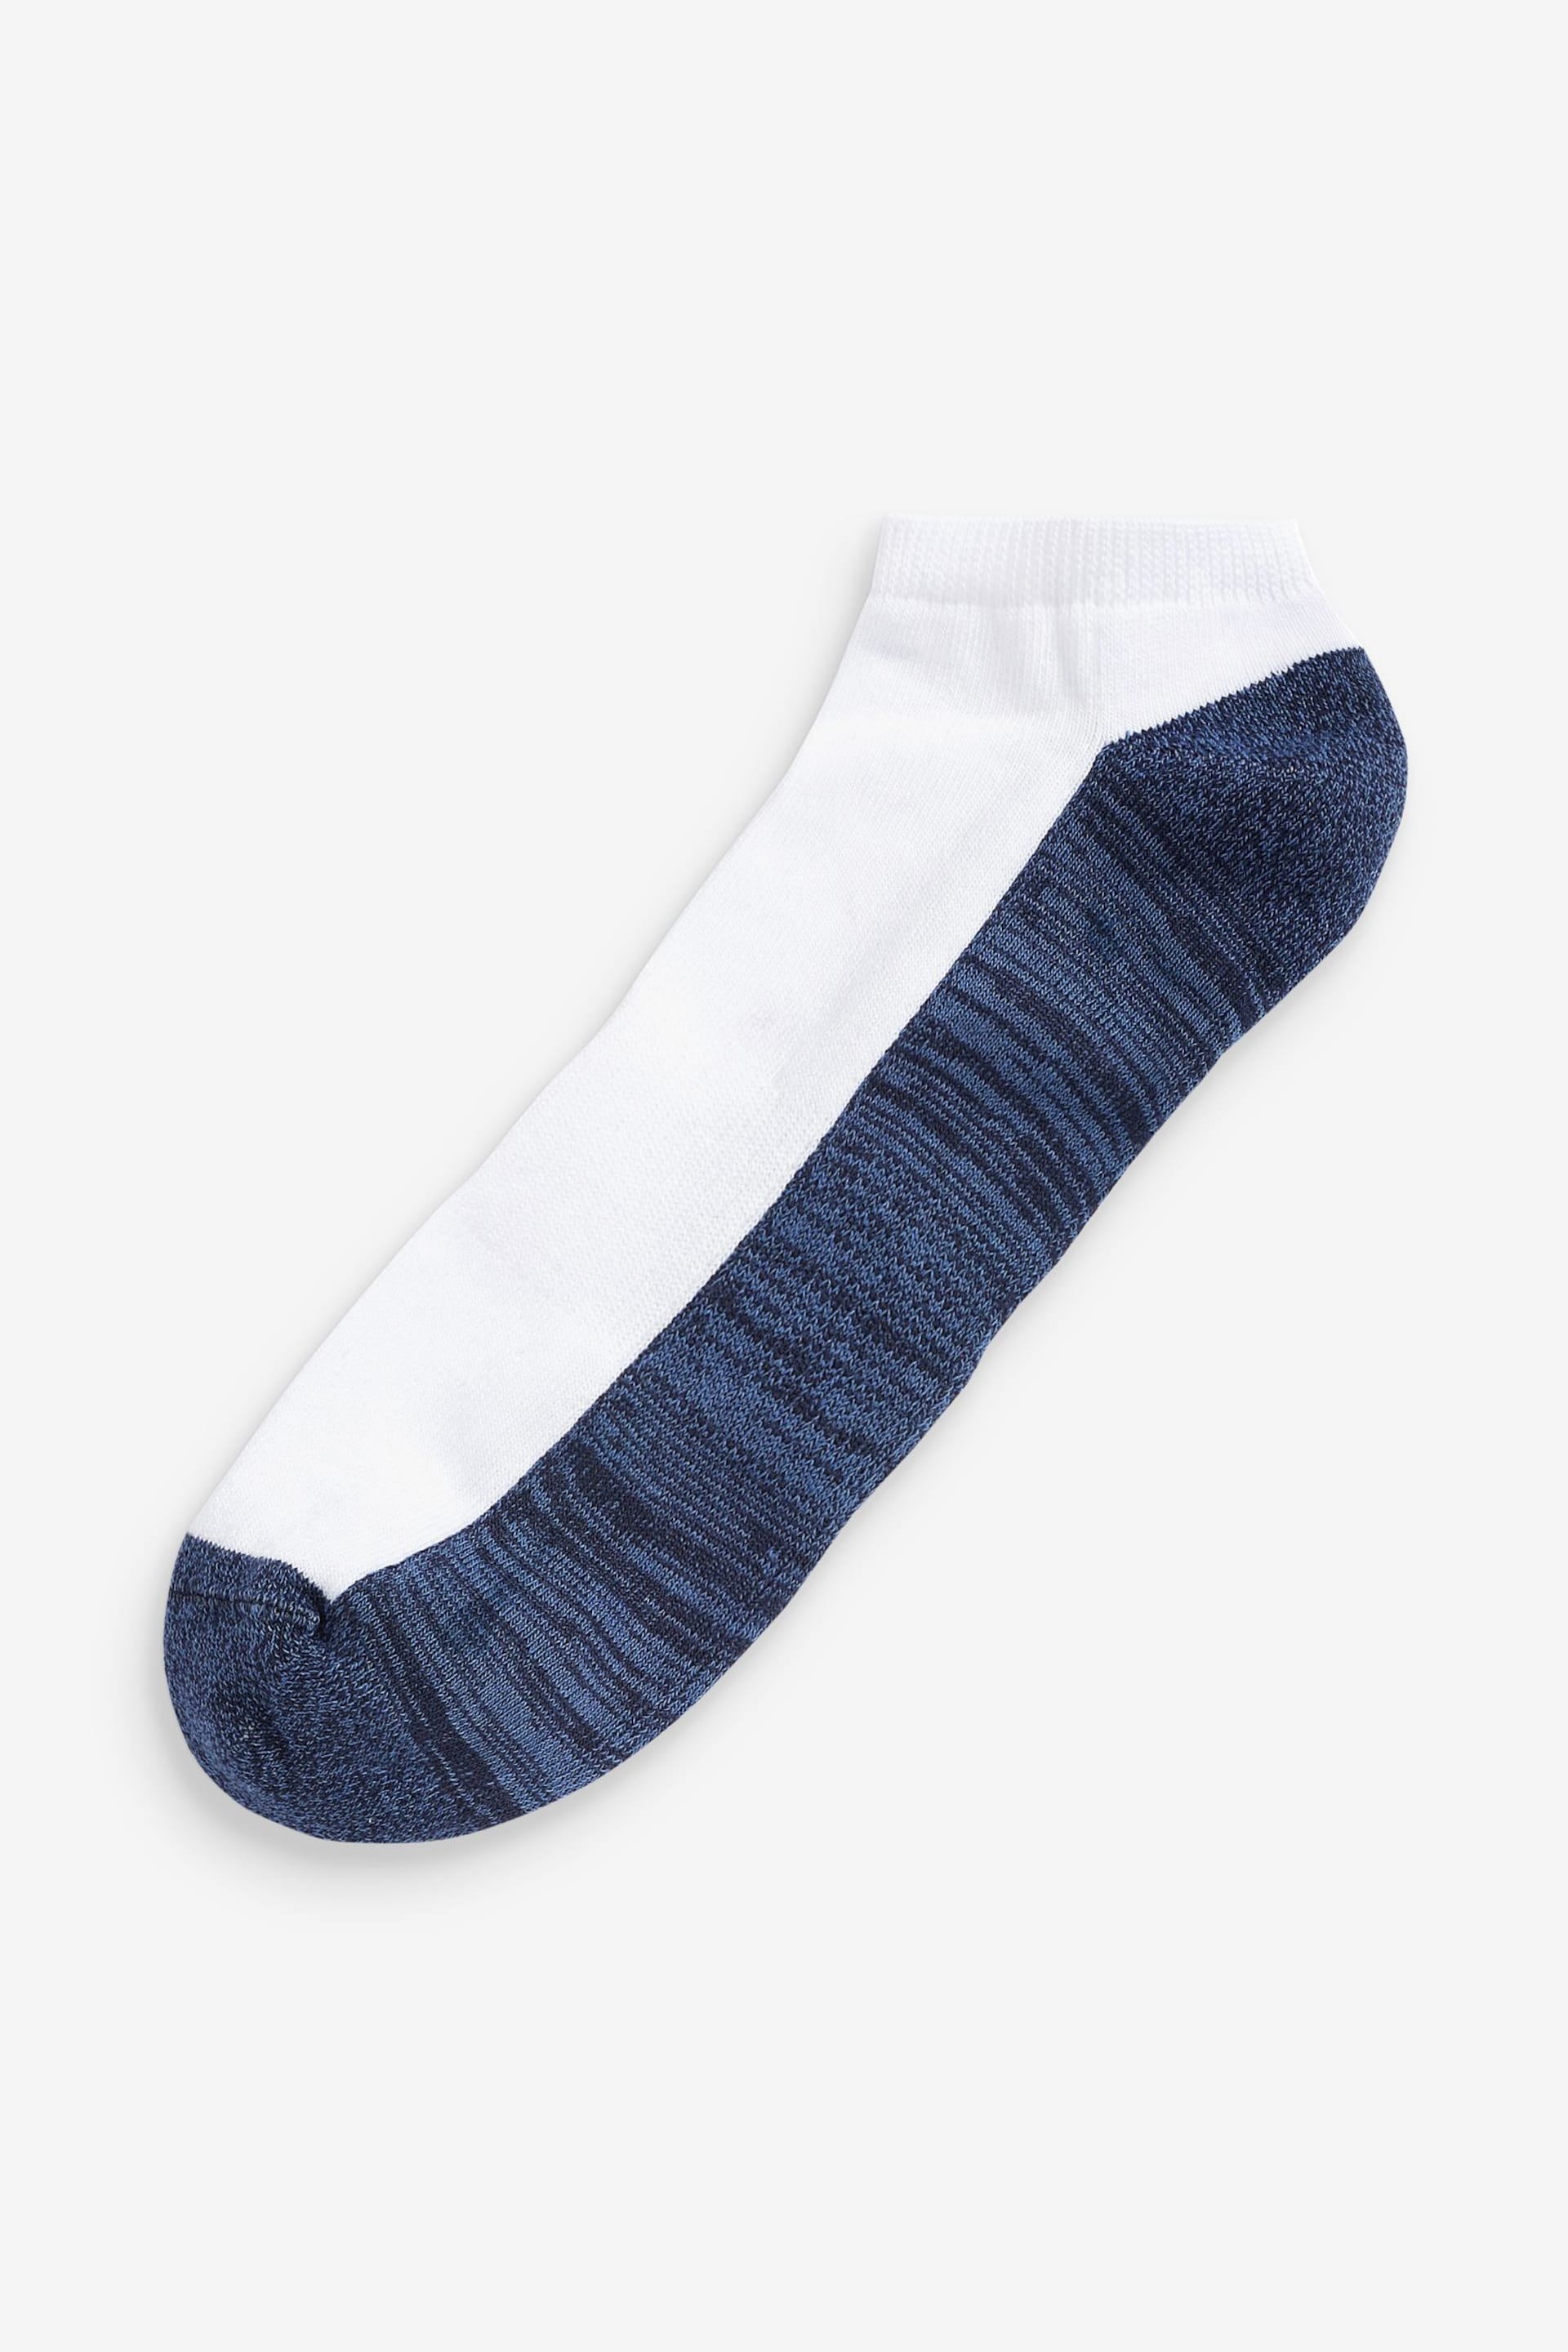 Blue/Grey 5 Pack Cushioned Trainers Socks - Image 5 of 6